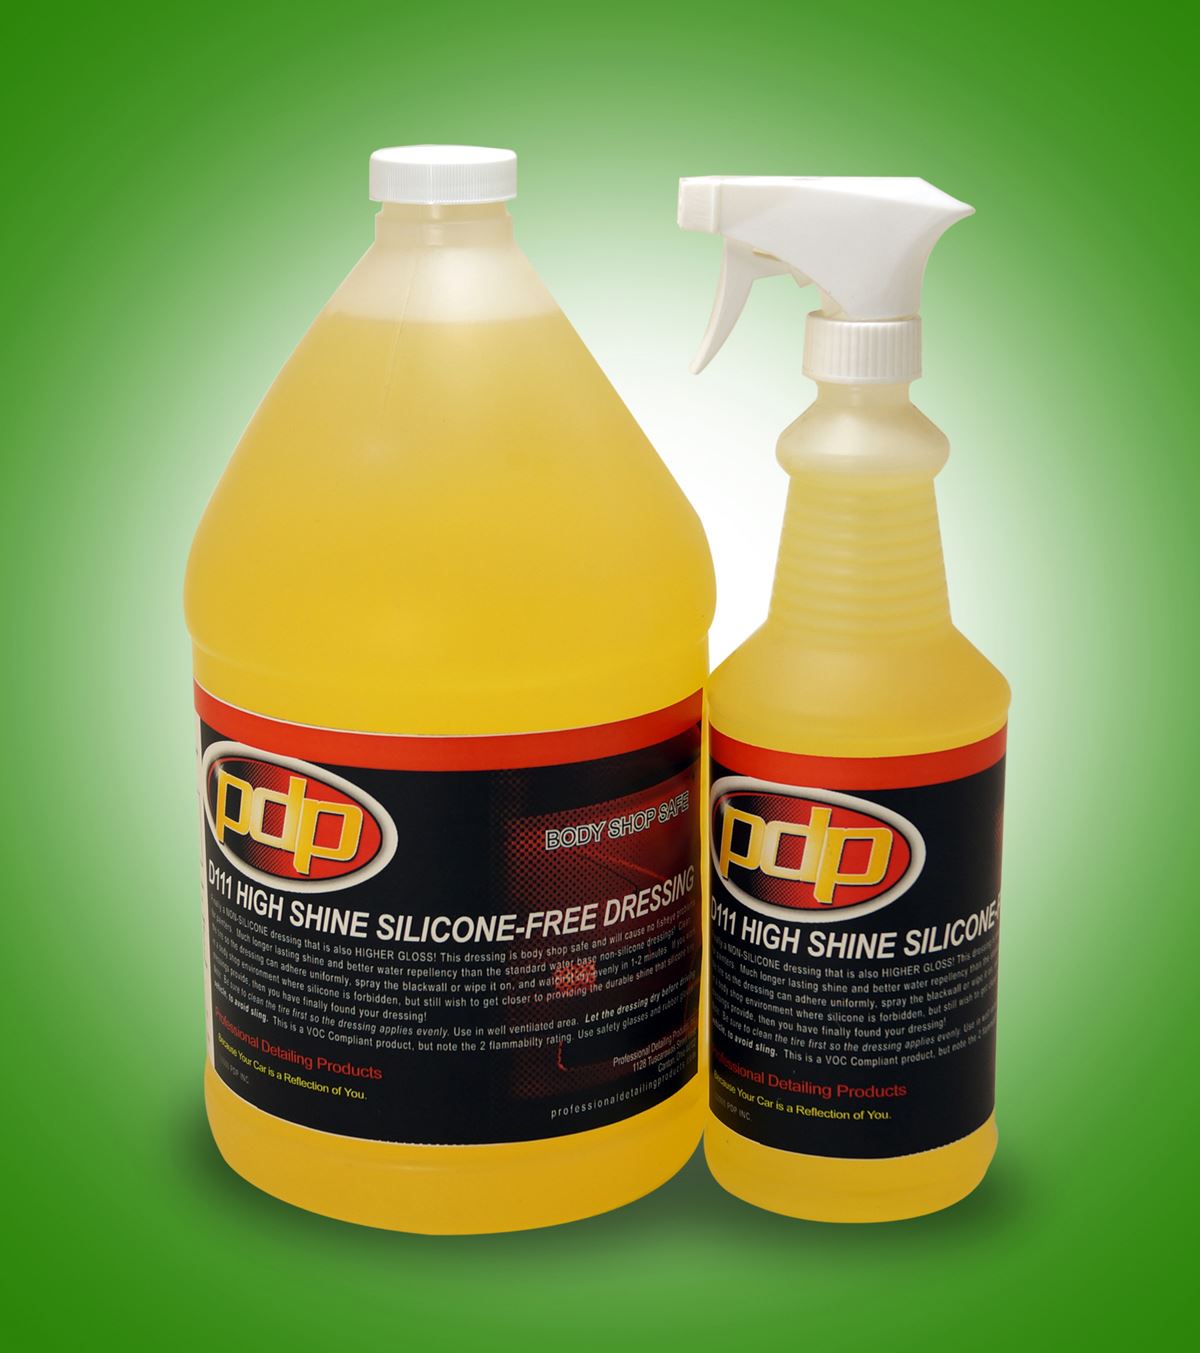 TIRE DRESSING APPLICATOR. Professional Detailing Products, Because Your Car  is a Reflection of You